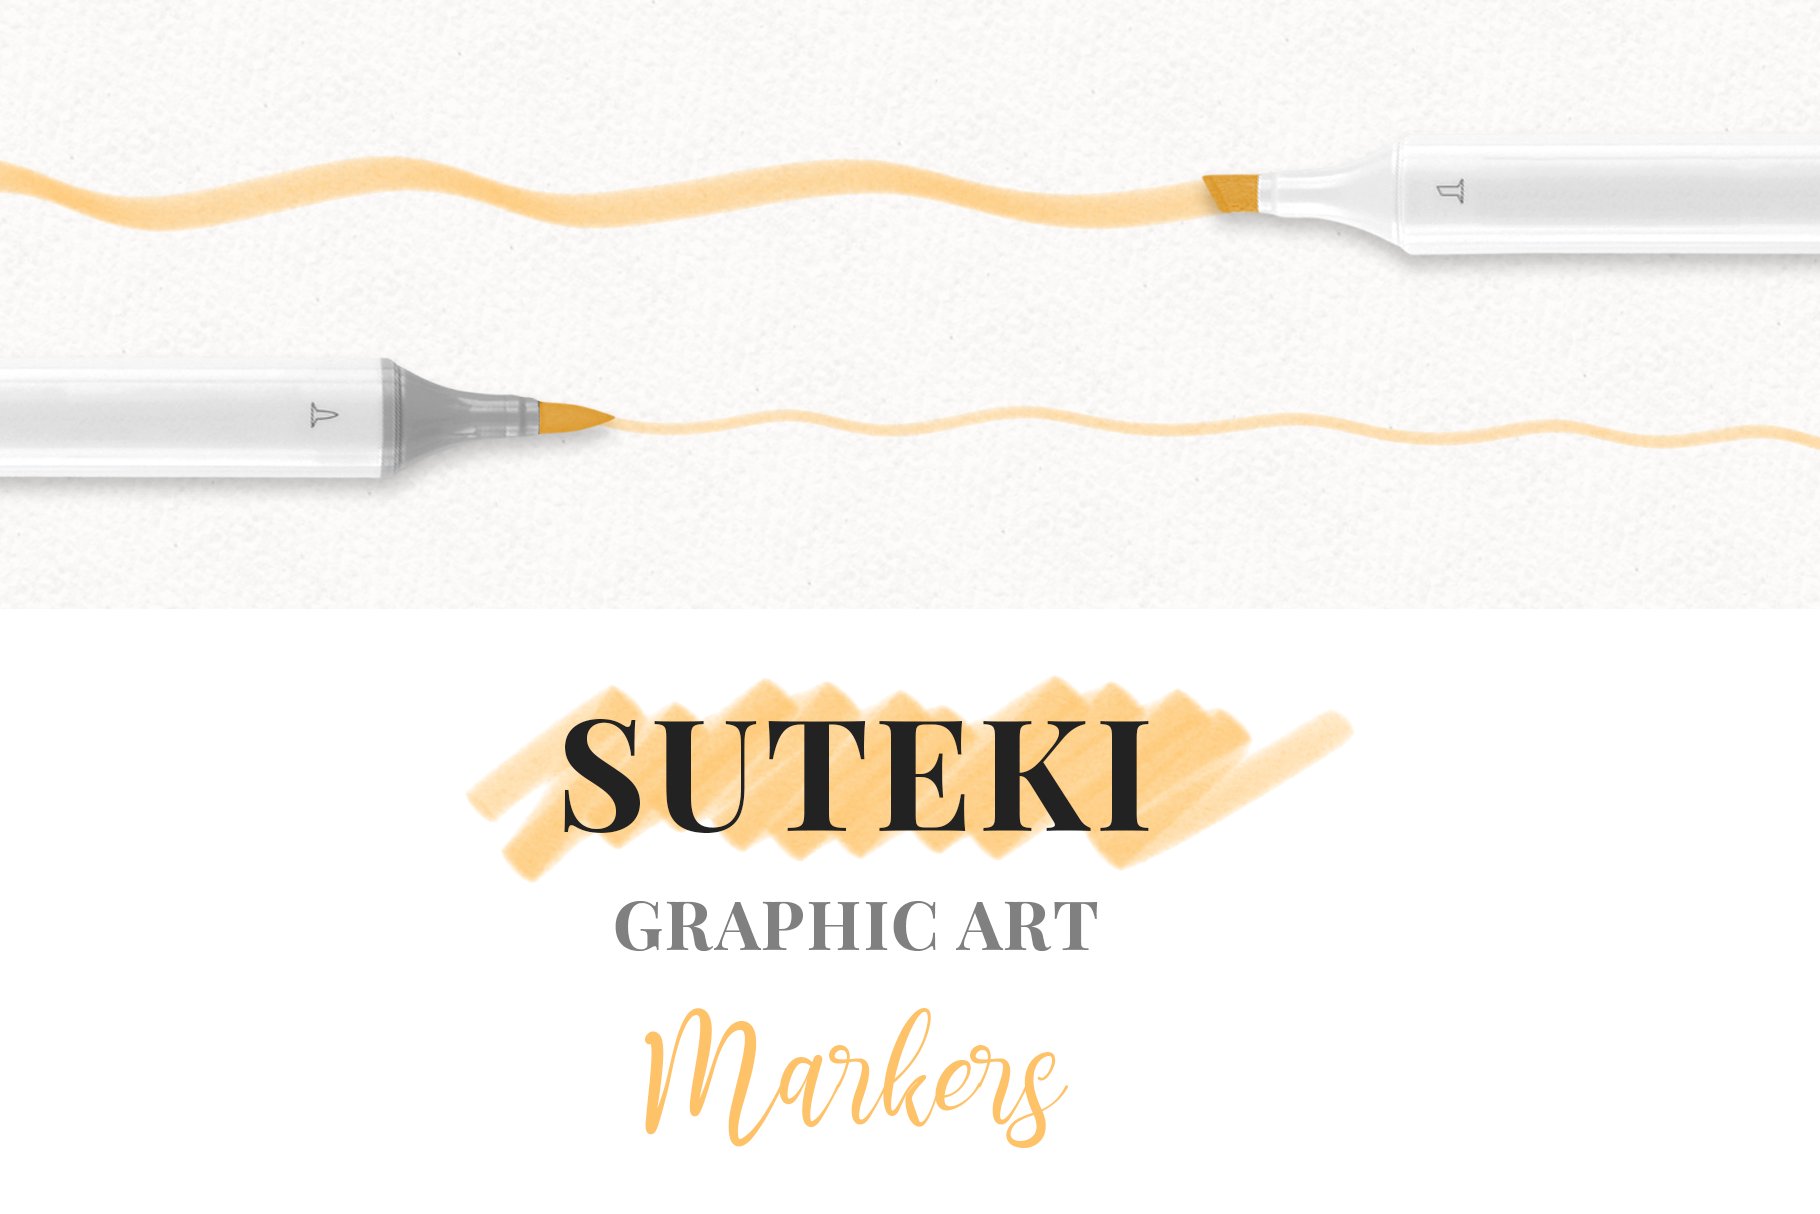 Suteki - Graphic Art Markers for PScover image.